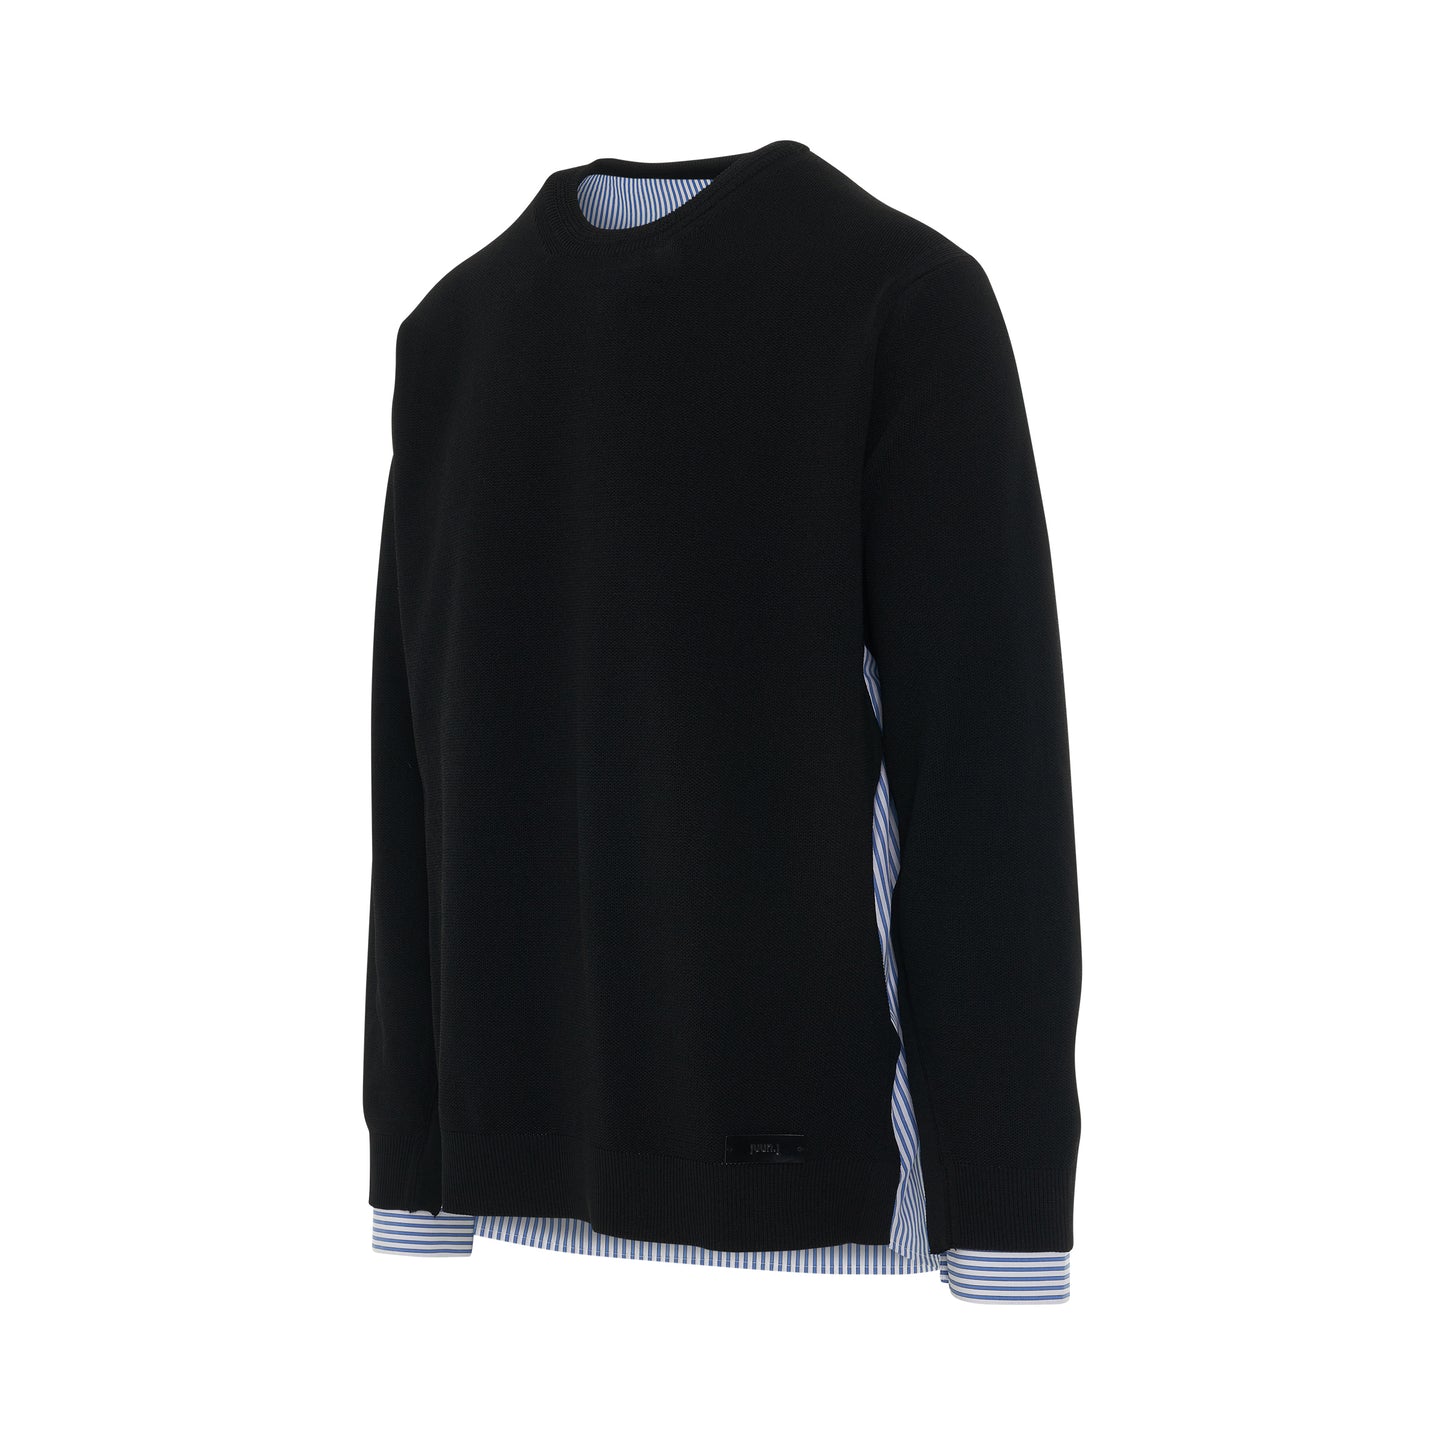 Woven Patched Round Sweater in Black